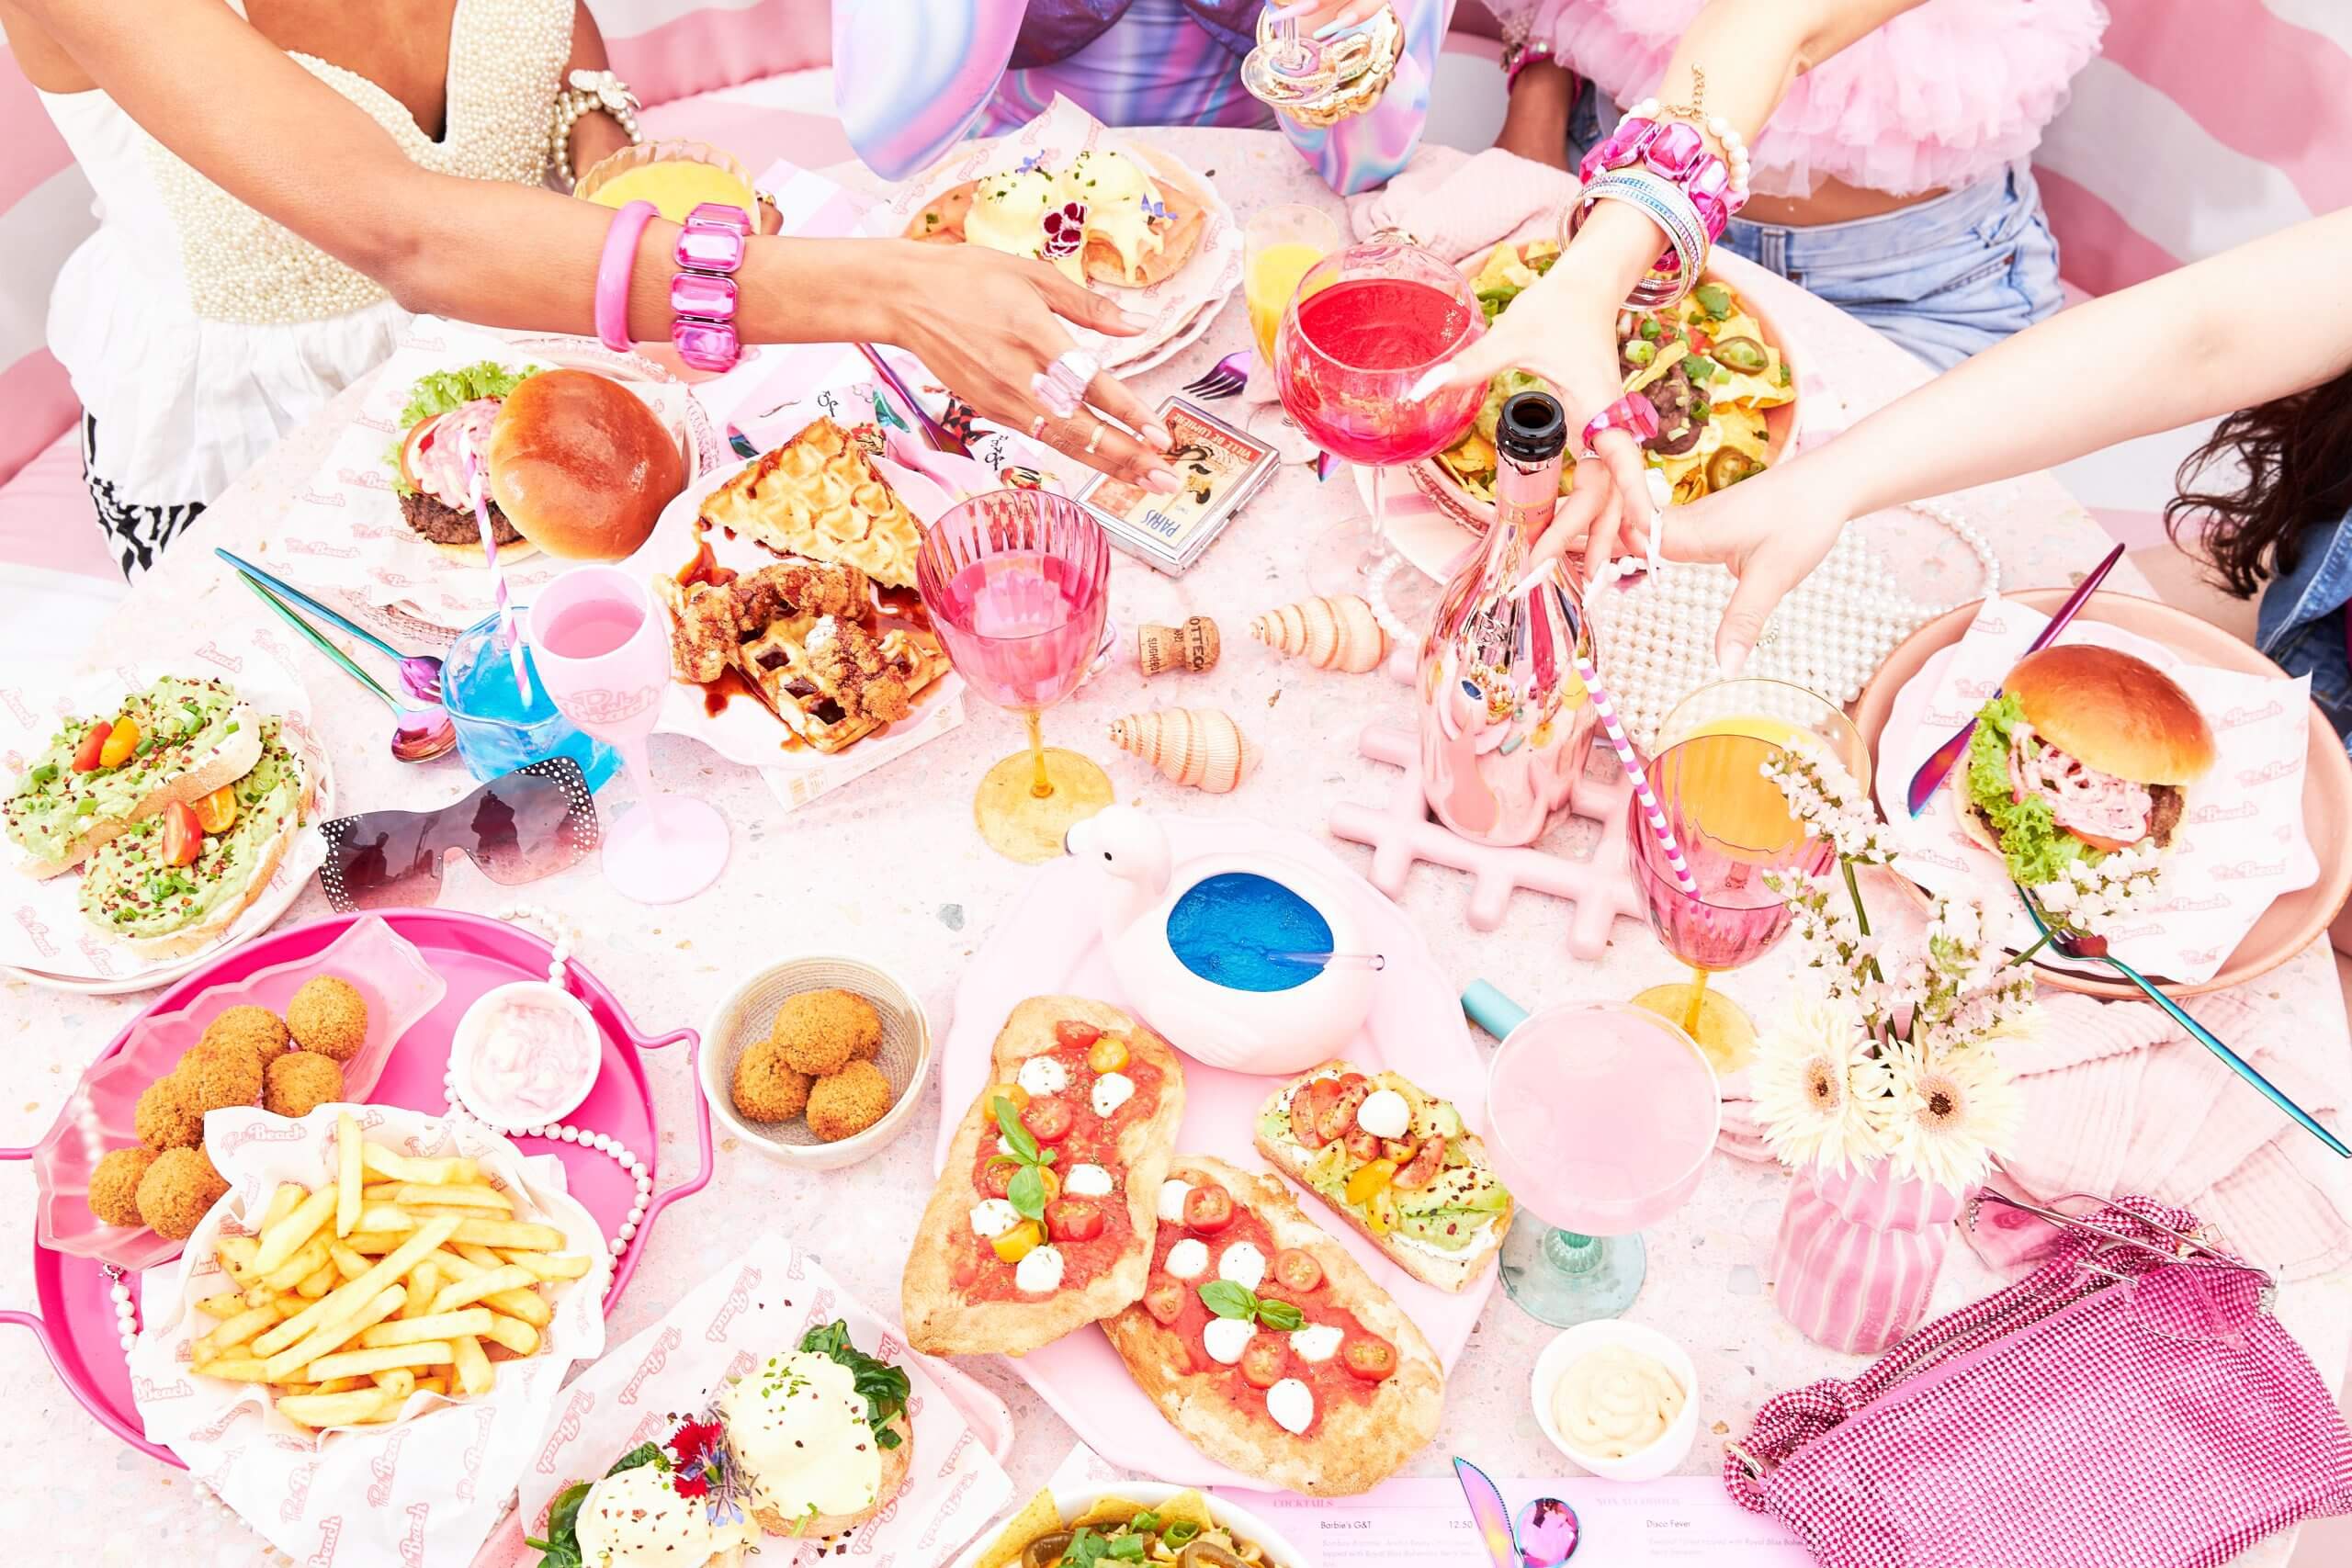 A lot of colorful food and drinks on a table during Pink Beach brunch